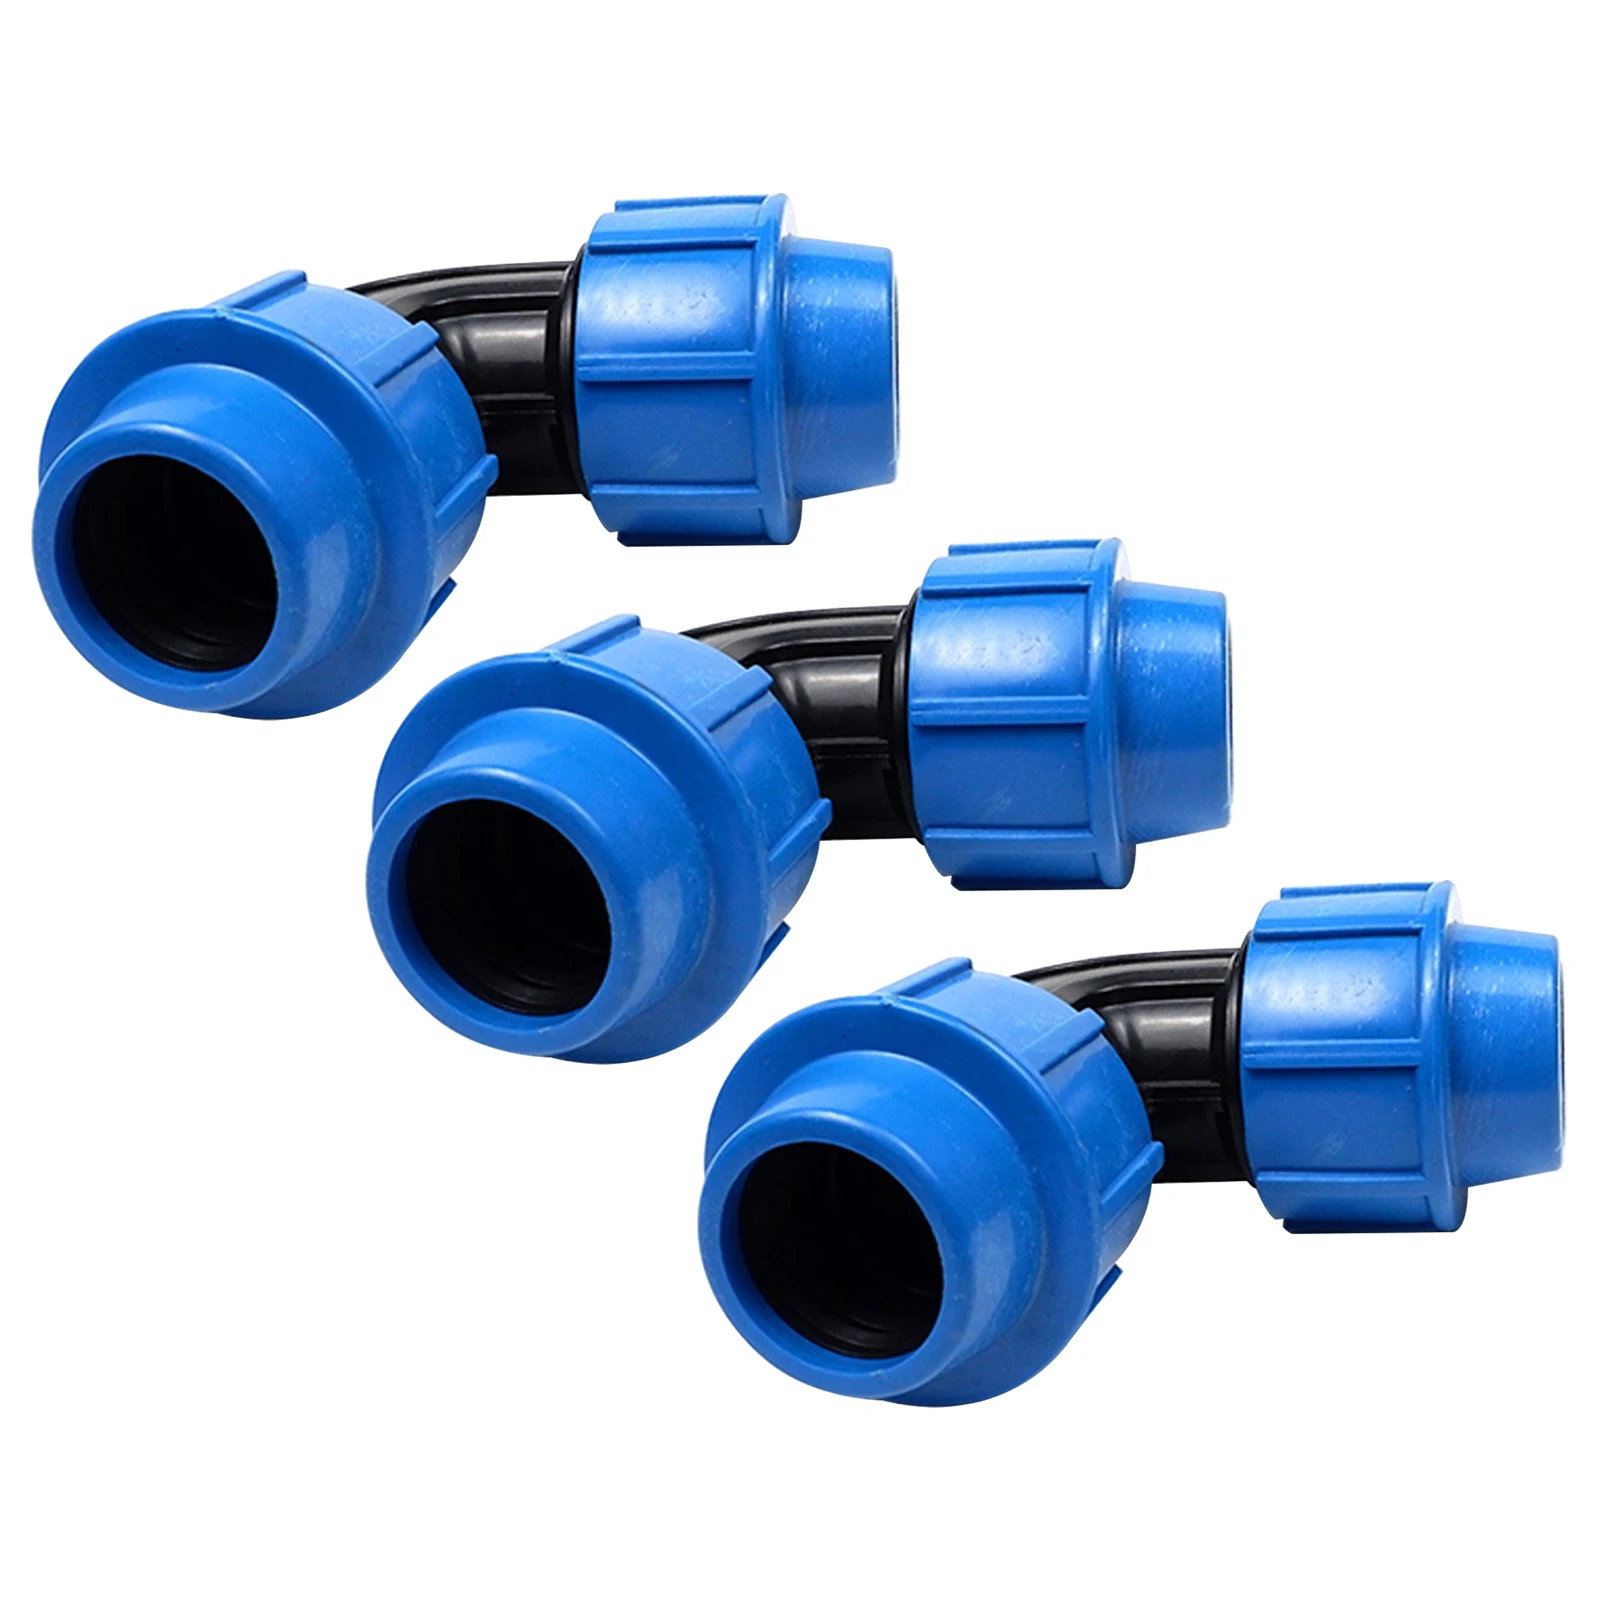 

3pcs Union Plastic Threaded Connection Irrigation Water Pipe Lock Connector PE Screw Quick Connect Elbow Fixture Indoor Use